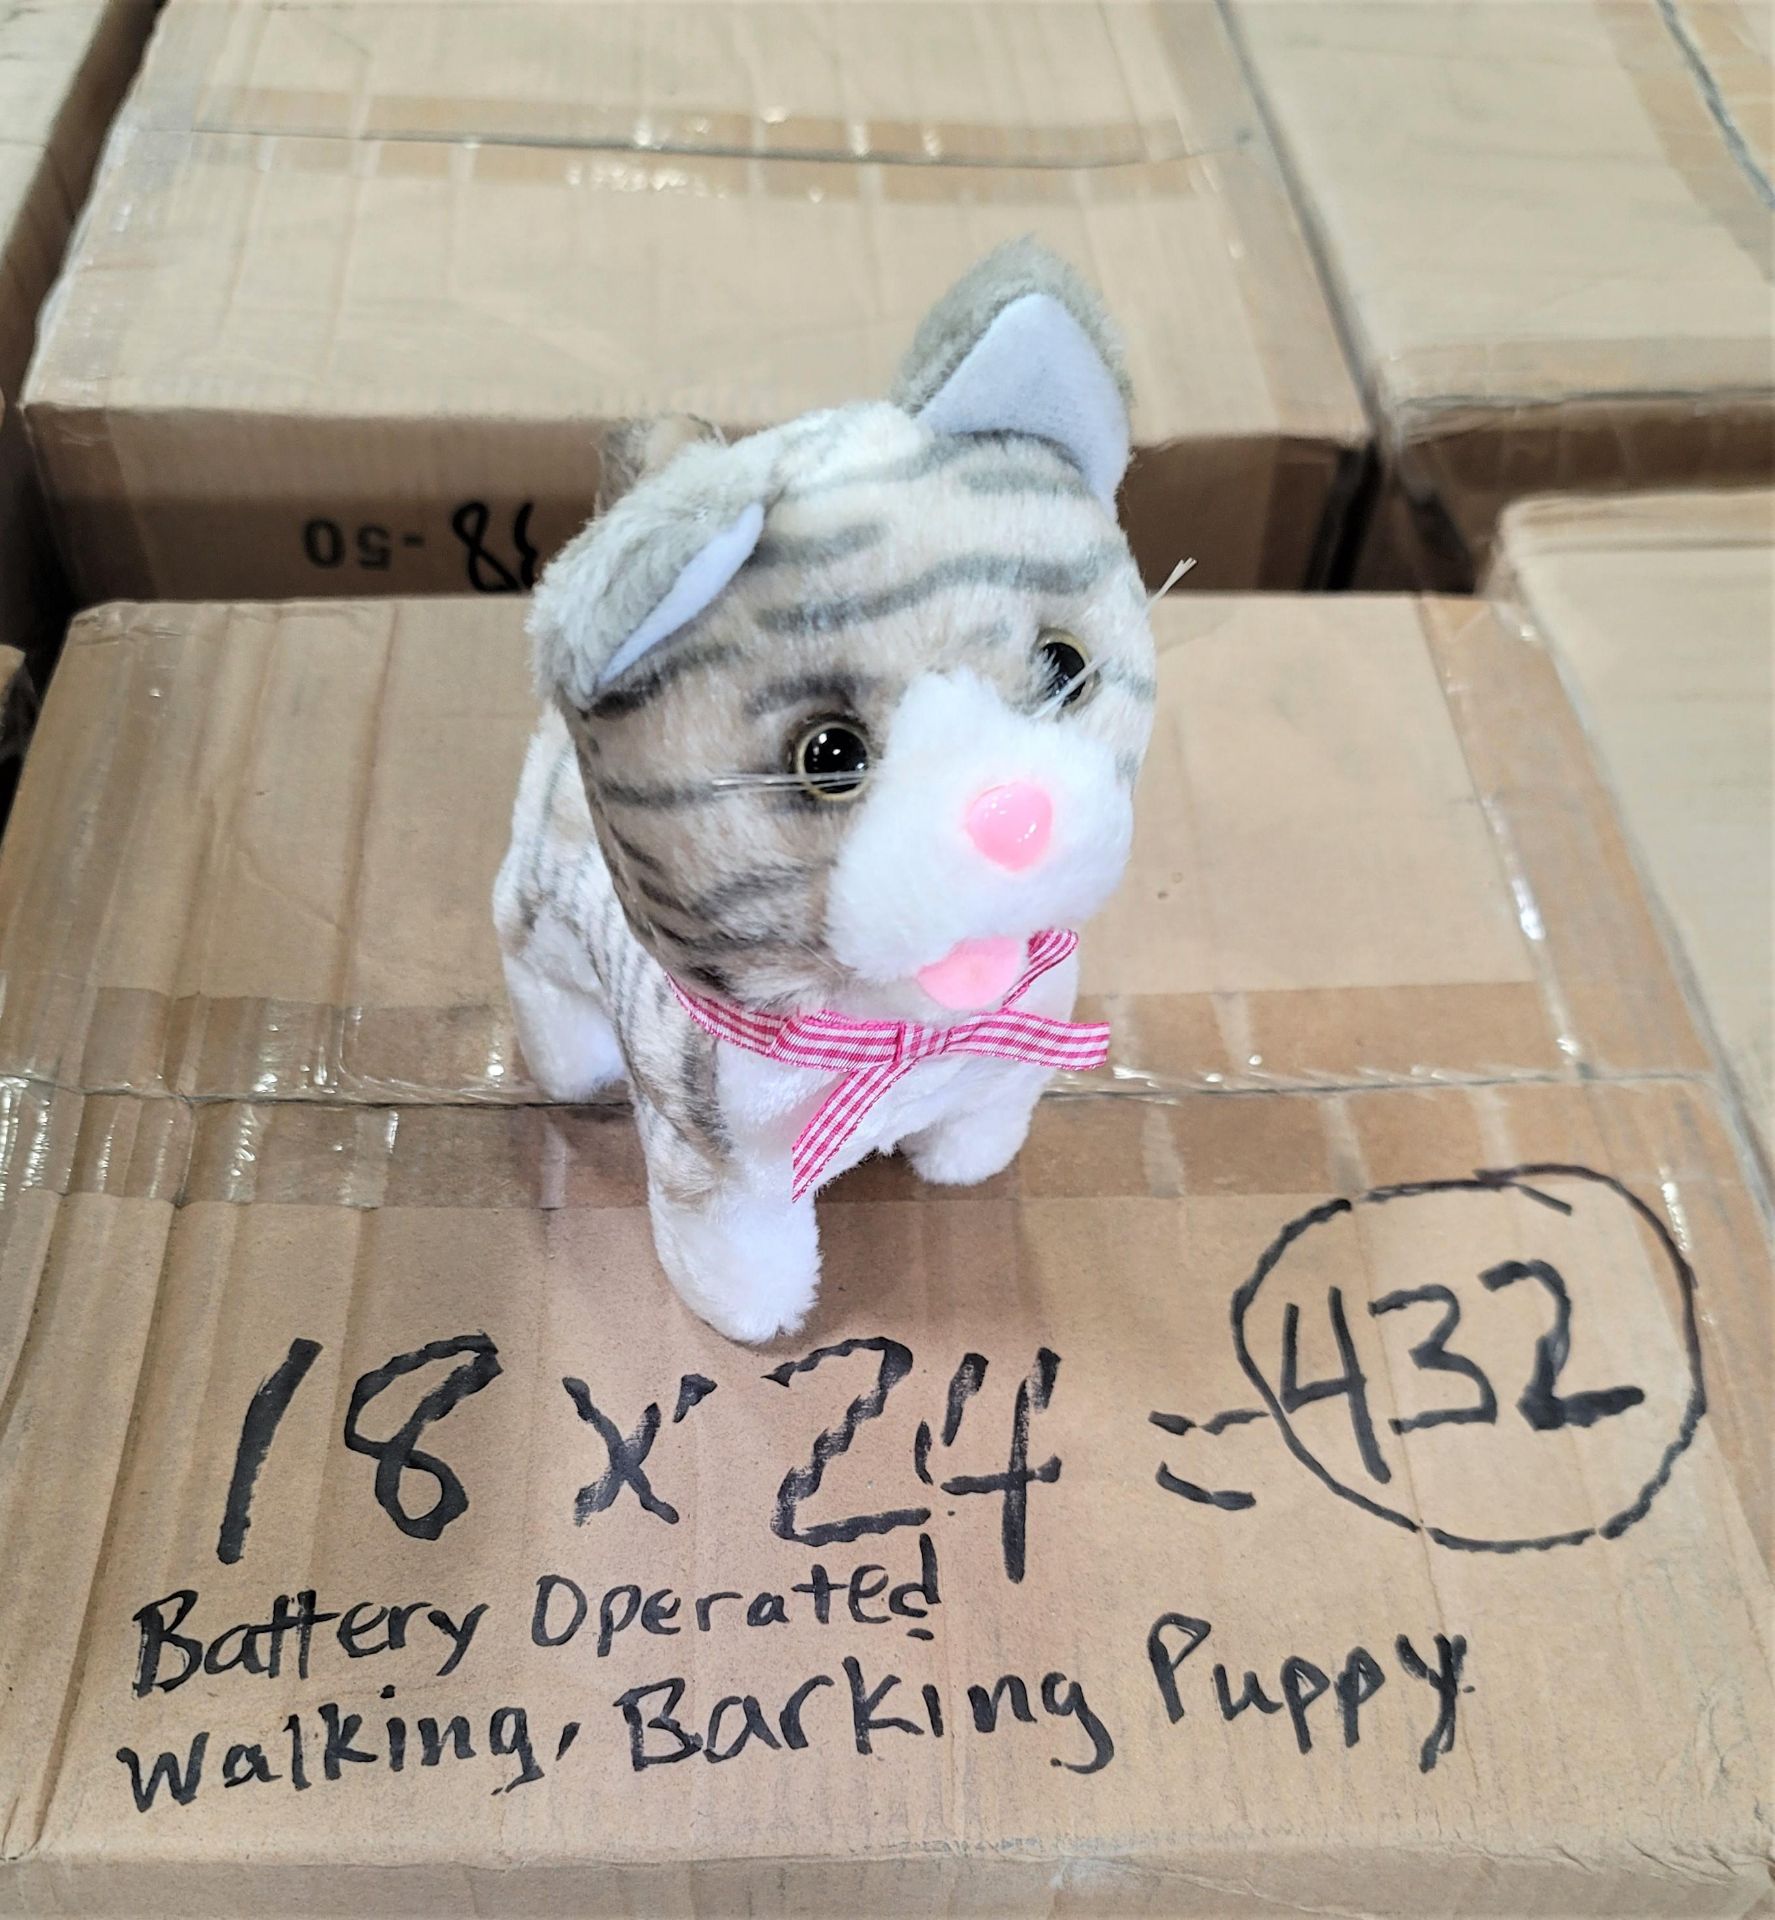 LOT - PALLET OF (432) BATTERY OPERATED WALKING, BARKING PUPPY, (18 CASES/24 PER CASE)